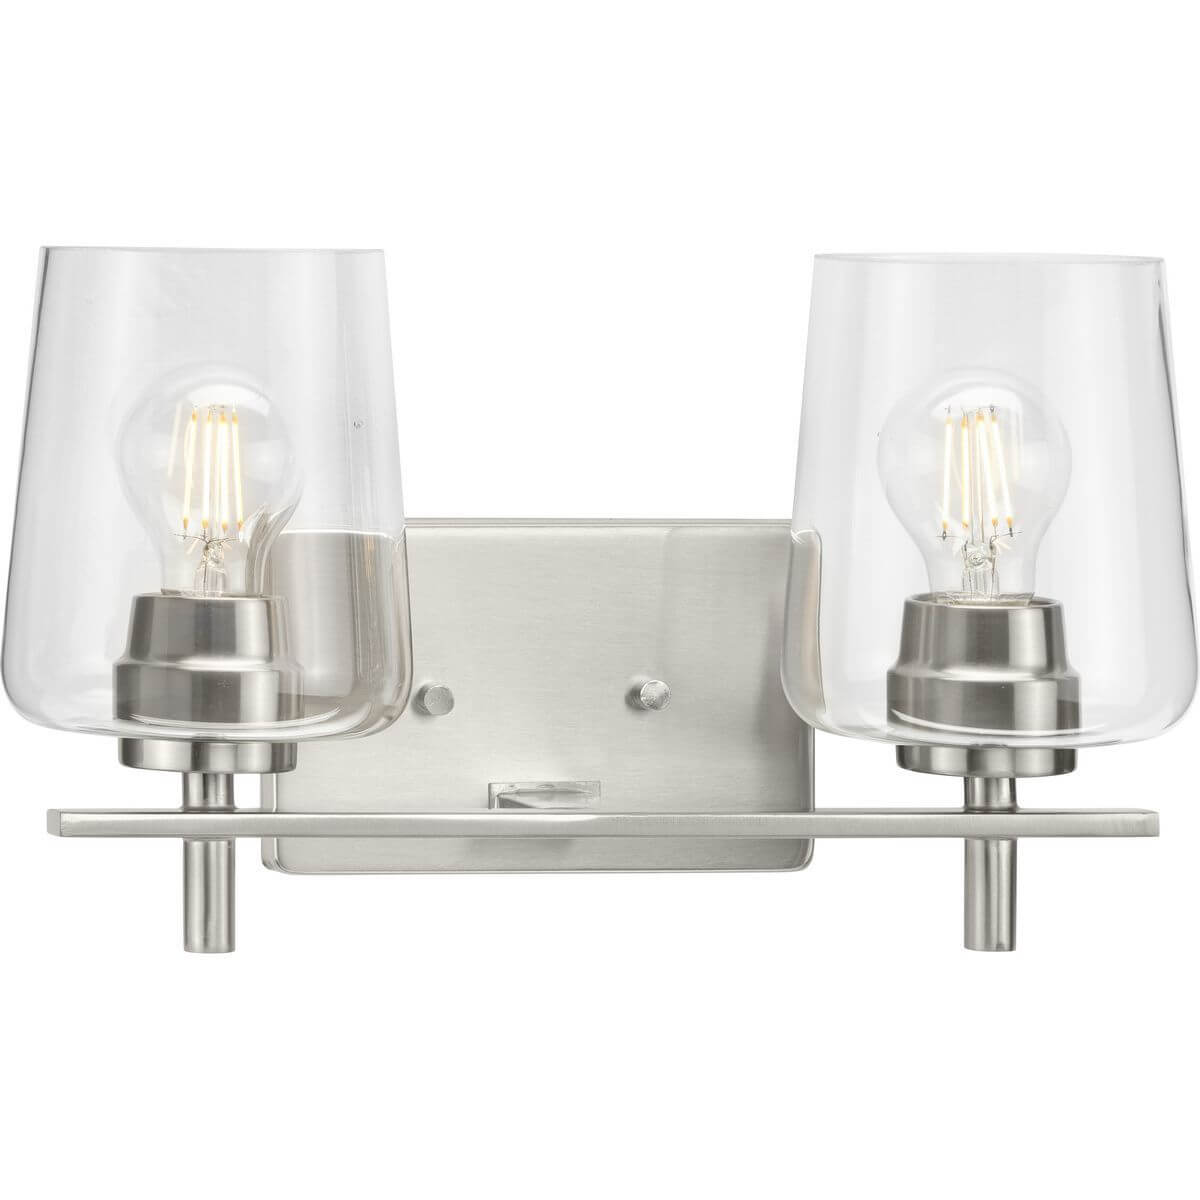 Progress Lighting Calais 2 Light 15 inch Bath Vanity Light in Brushed Nickel with Clear Glass P300361-009